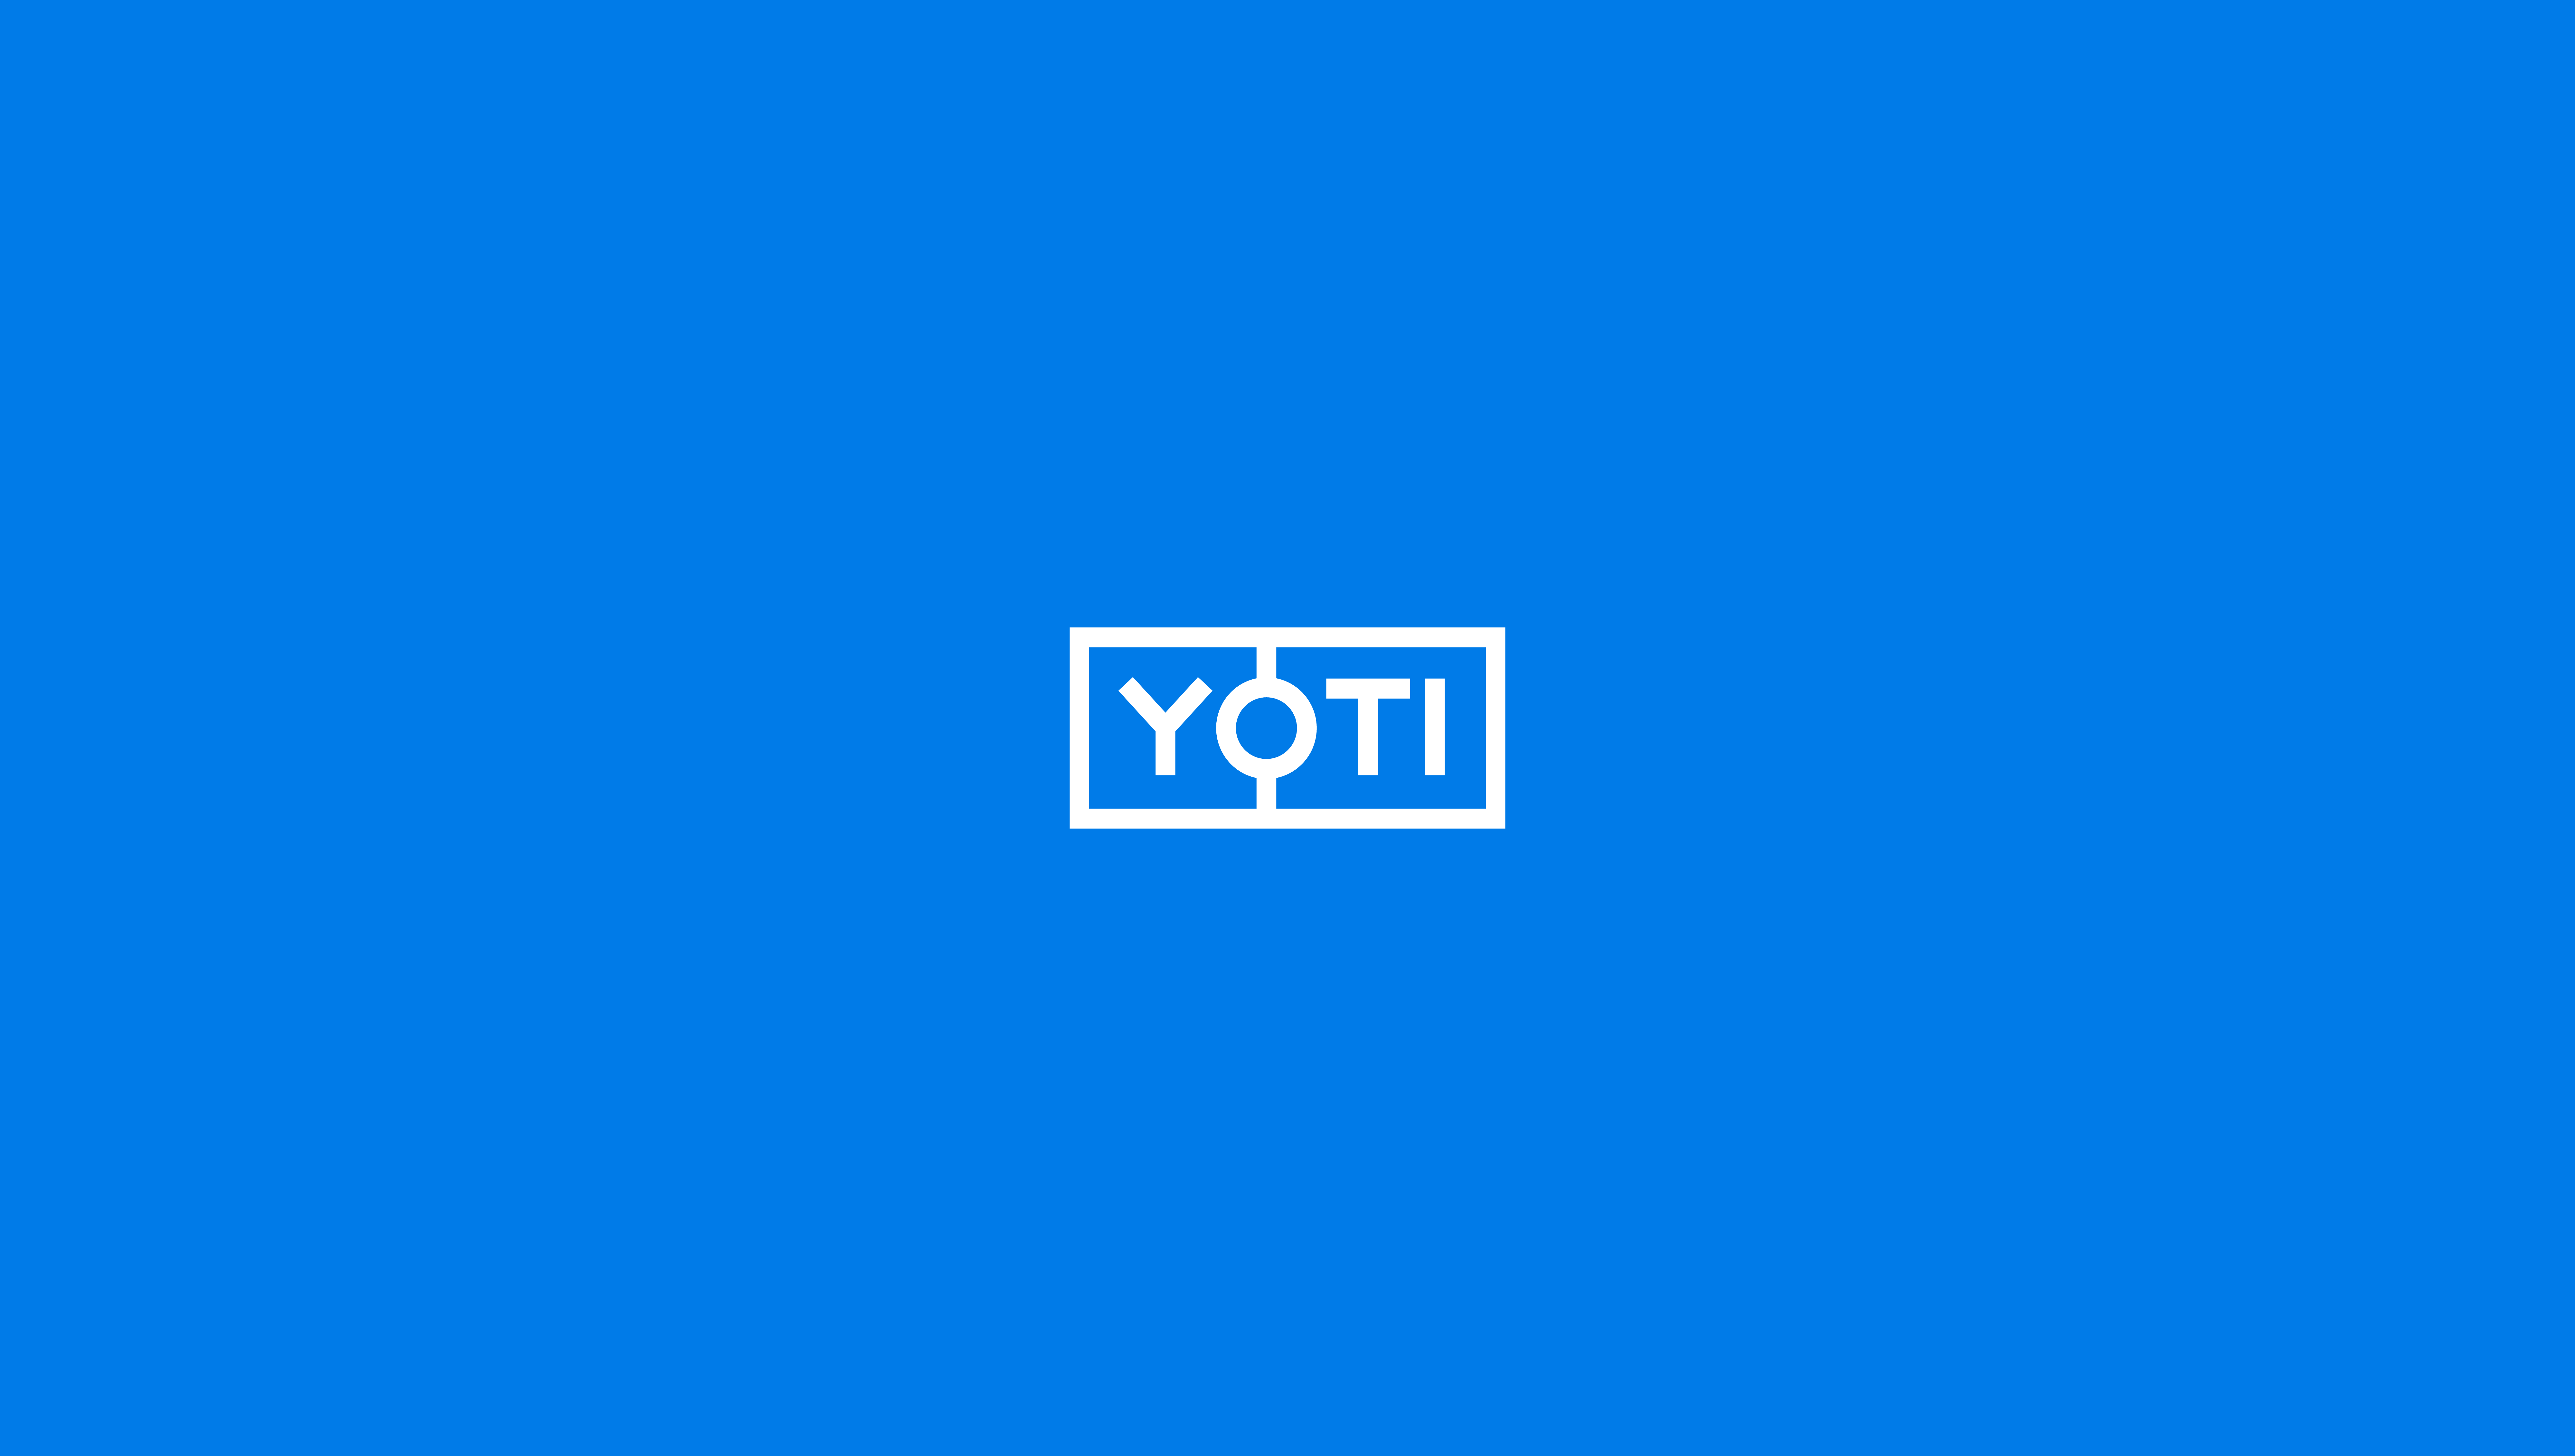 Yoti raises £8m equity investment at an £82m valuation